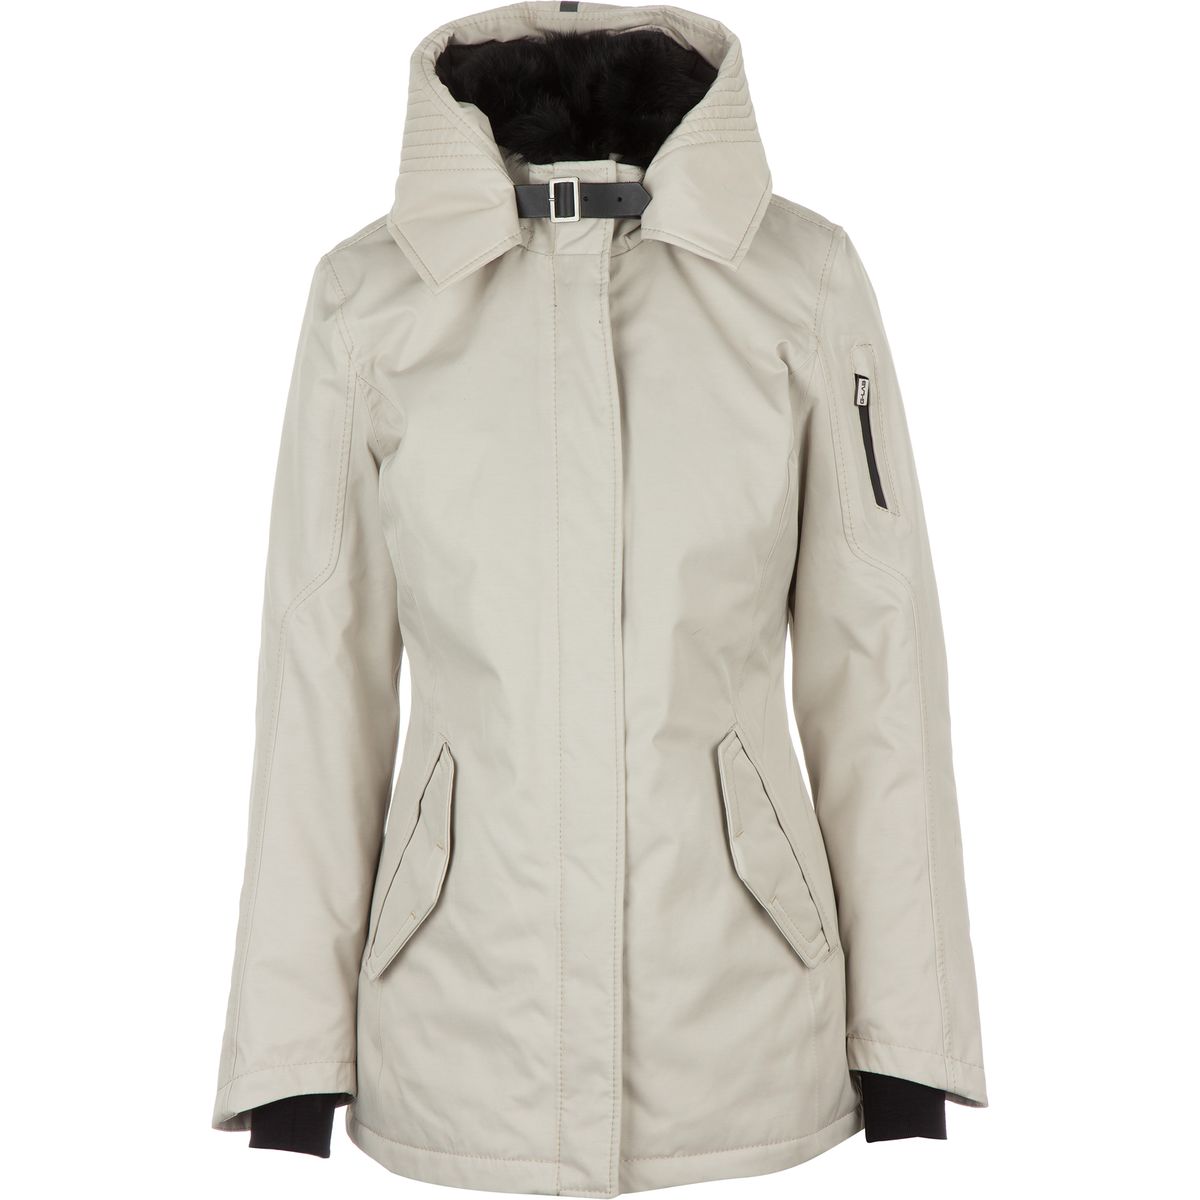 G-Lab Mayfair II Insulated Jacket - Women's - Clothing